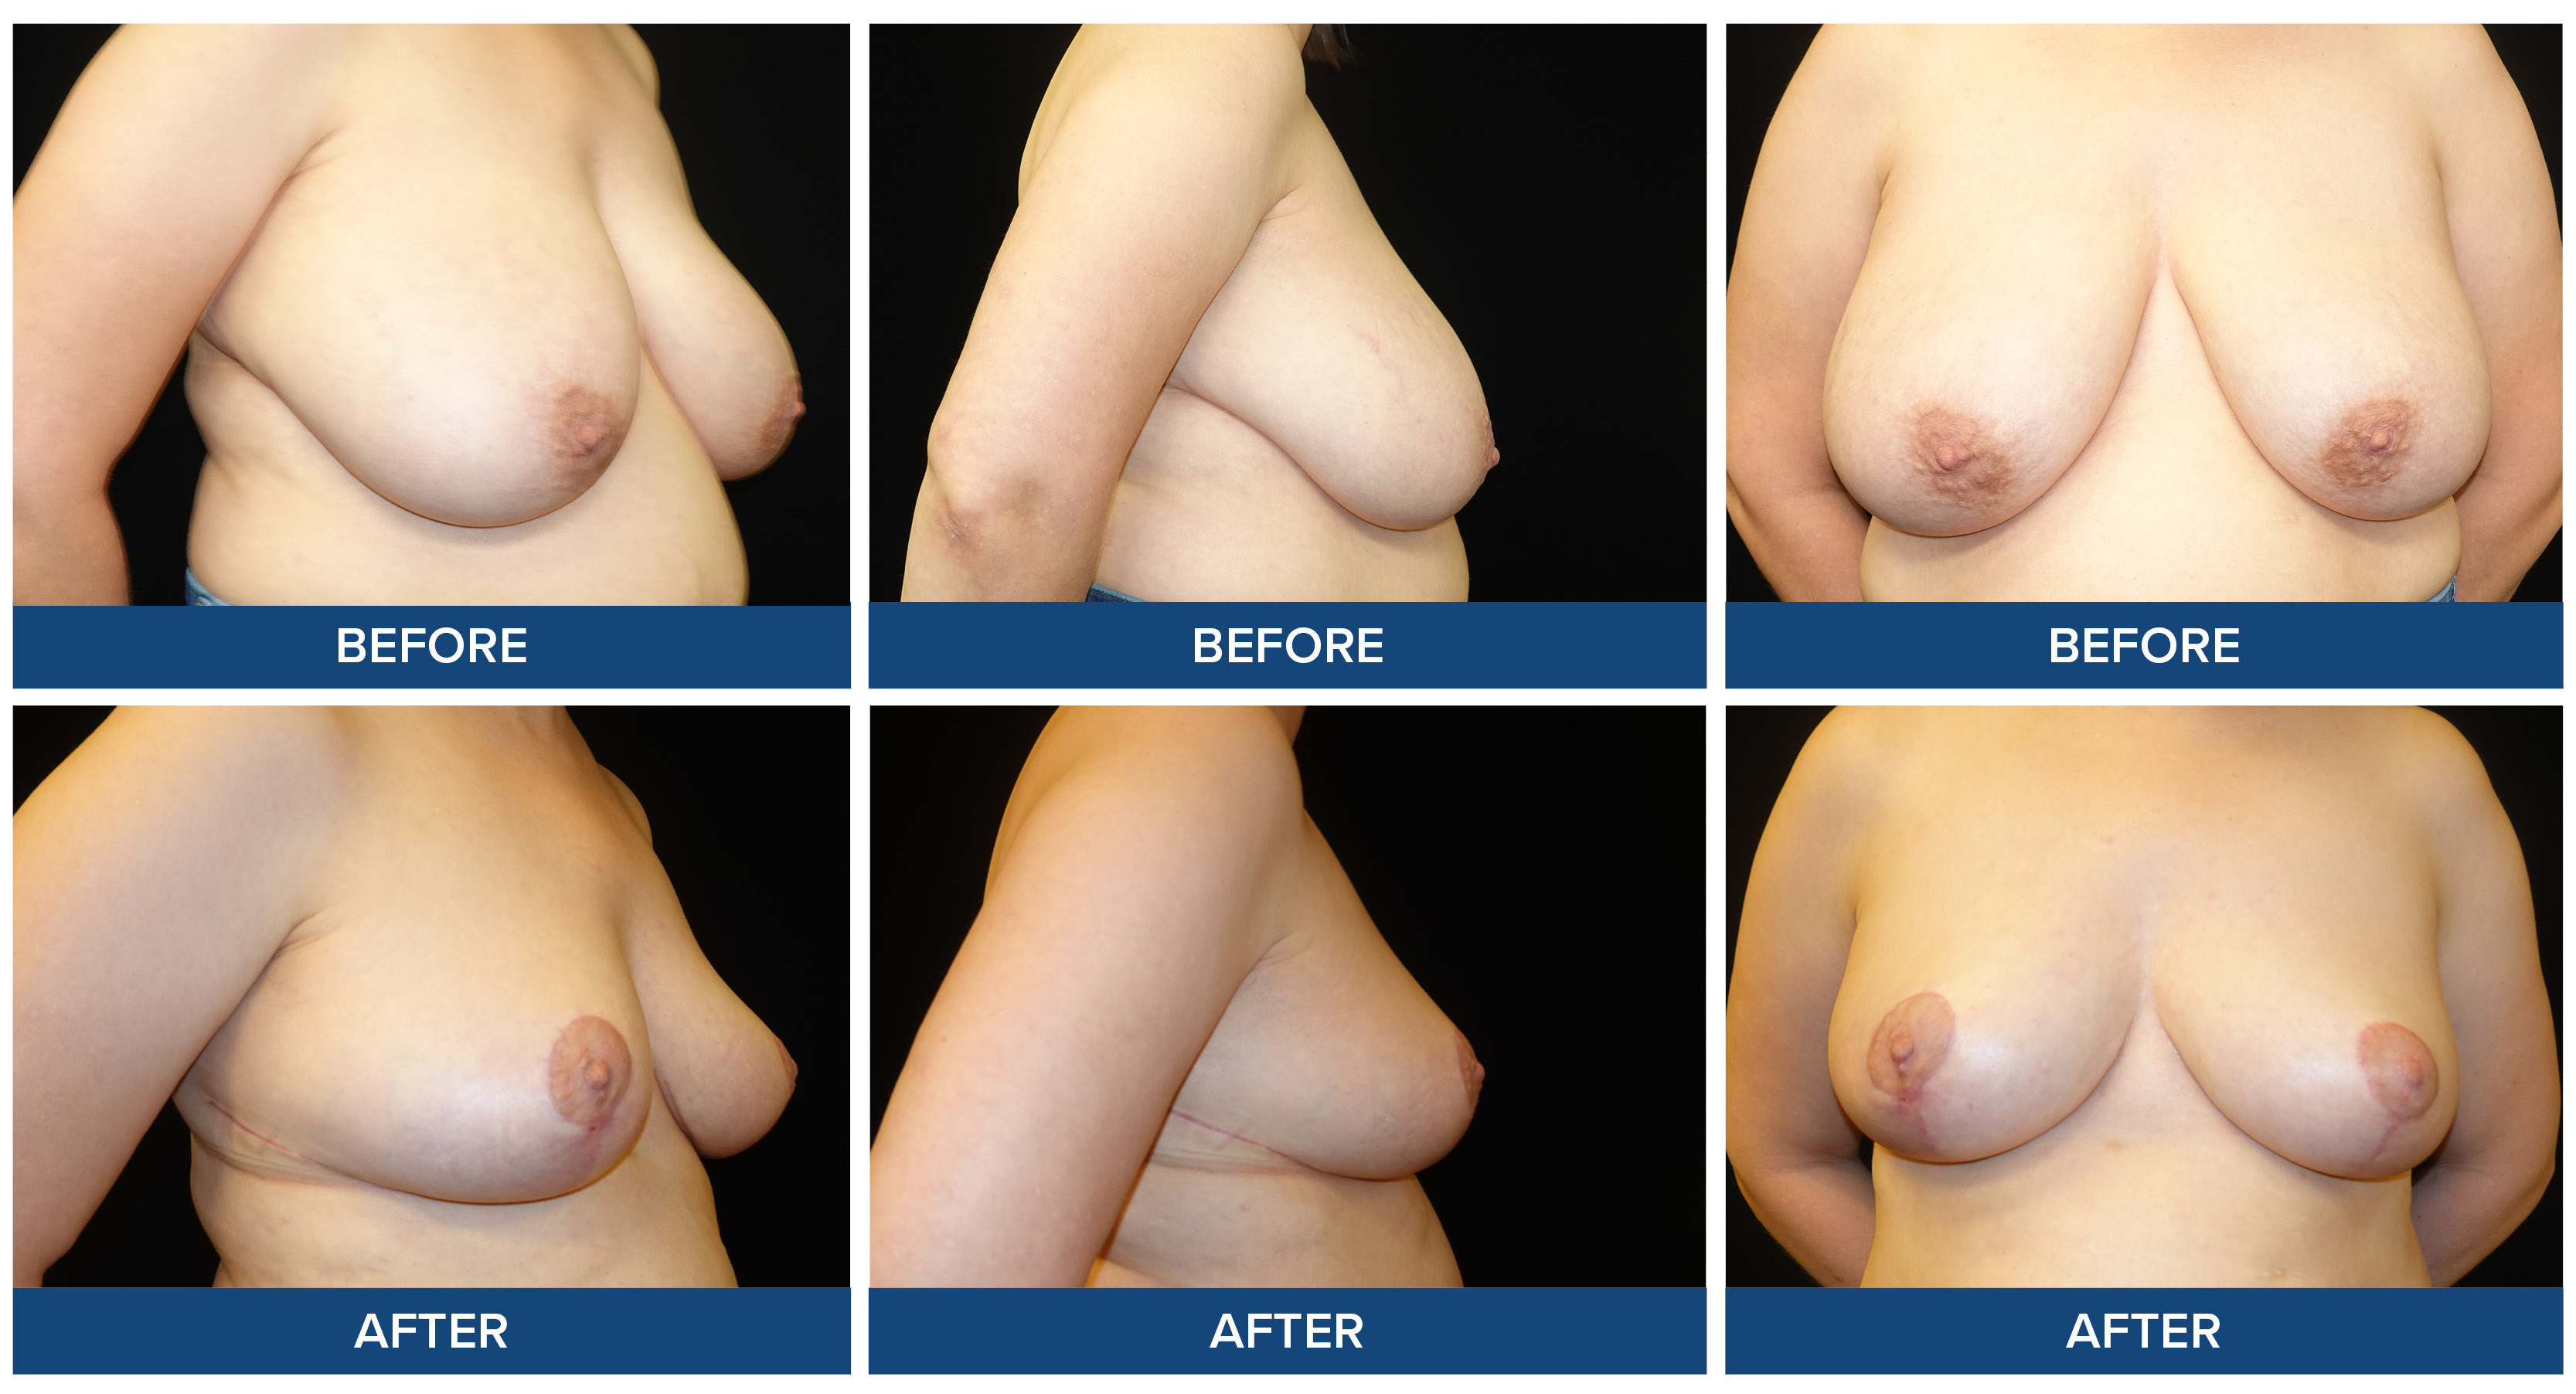 Before and after photos of a female patient breast reduction procedure.